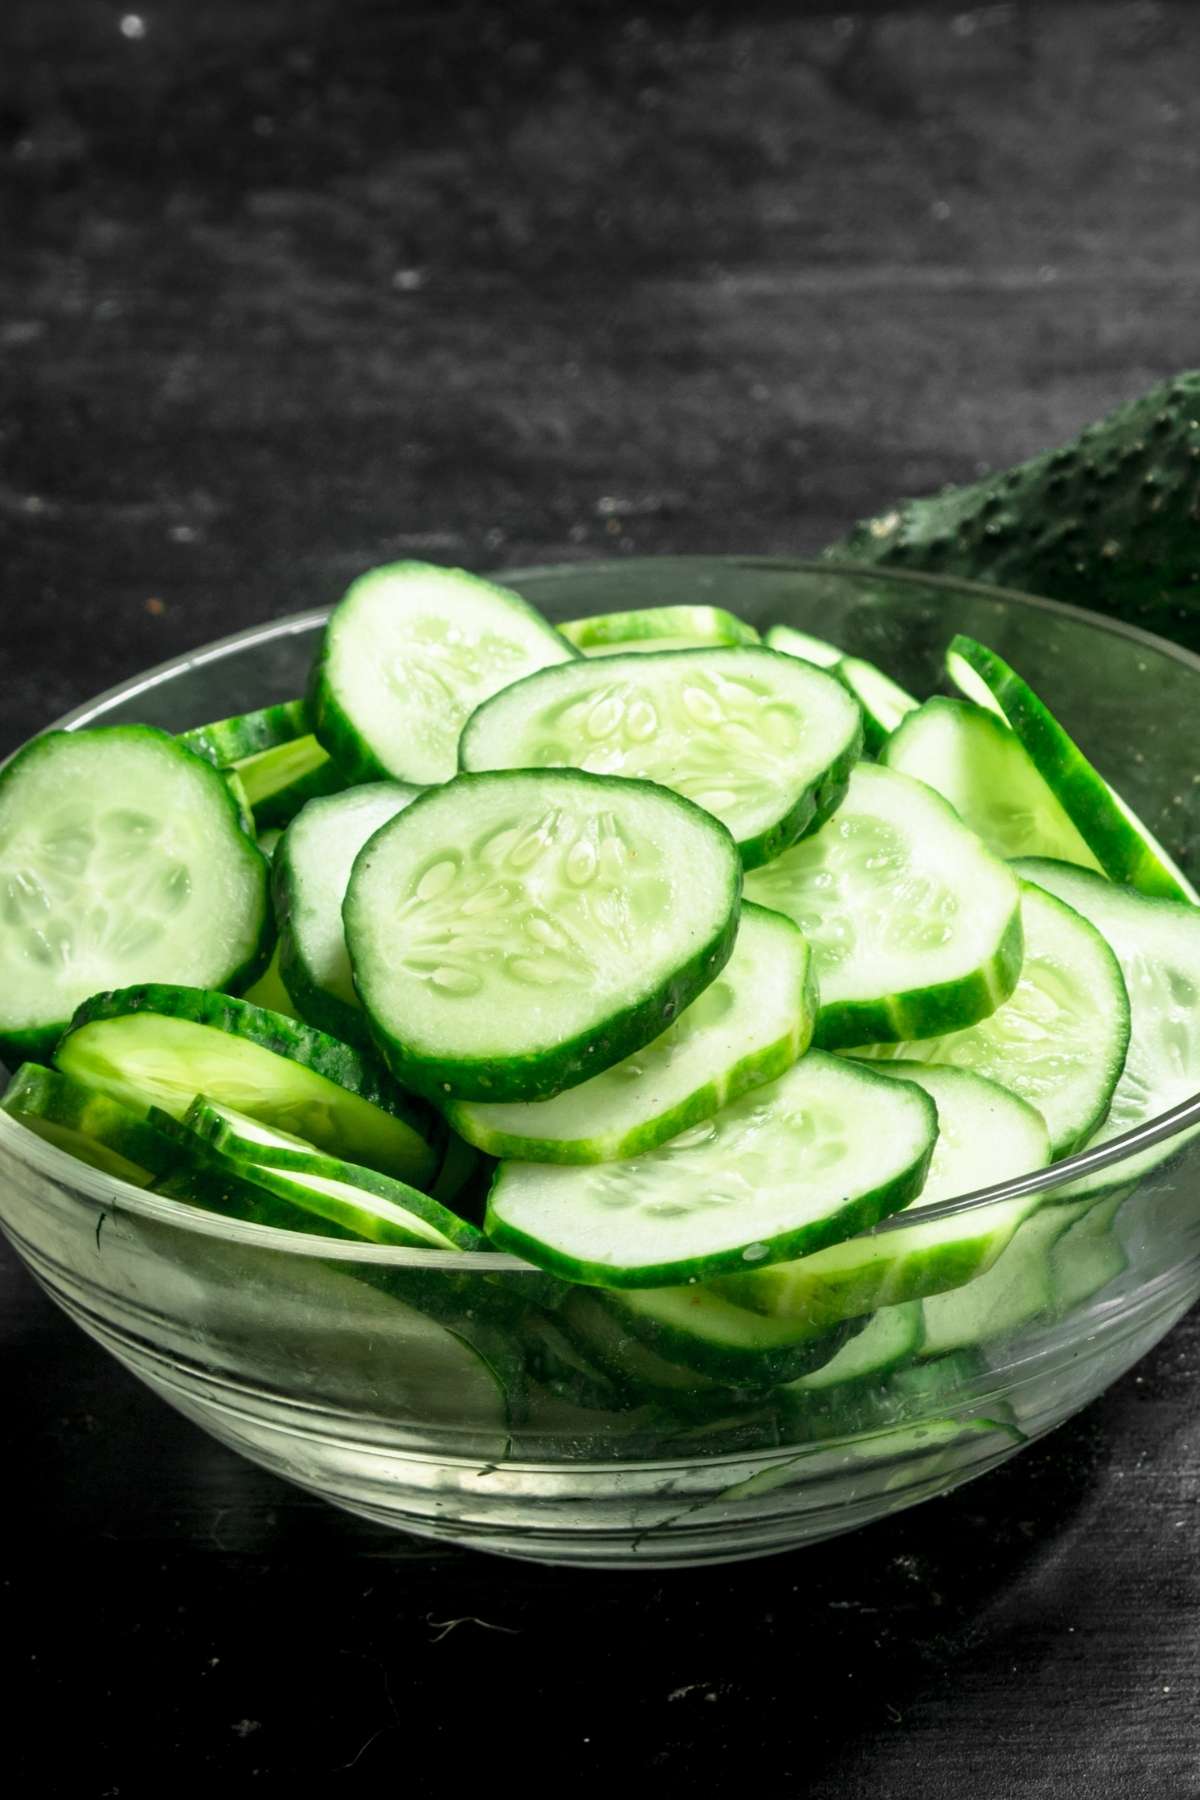 If you have a lot of cucumbers on hand, either from your home garden or from a sale at your grocer, you may wonder if it’s possible to freeze cucumbers. While freezing cucumbers will affect the texture, largely because they contain a lot of water, you can freeze cucumbers and then use them in ways you may not have thought of before.